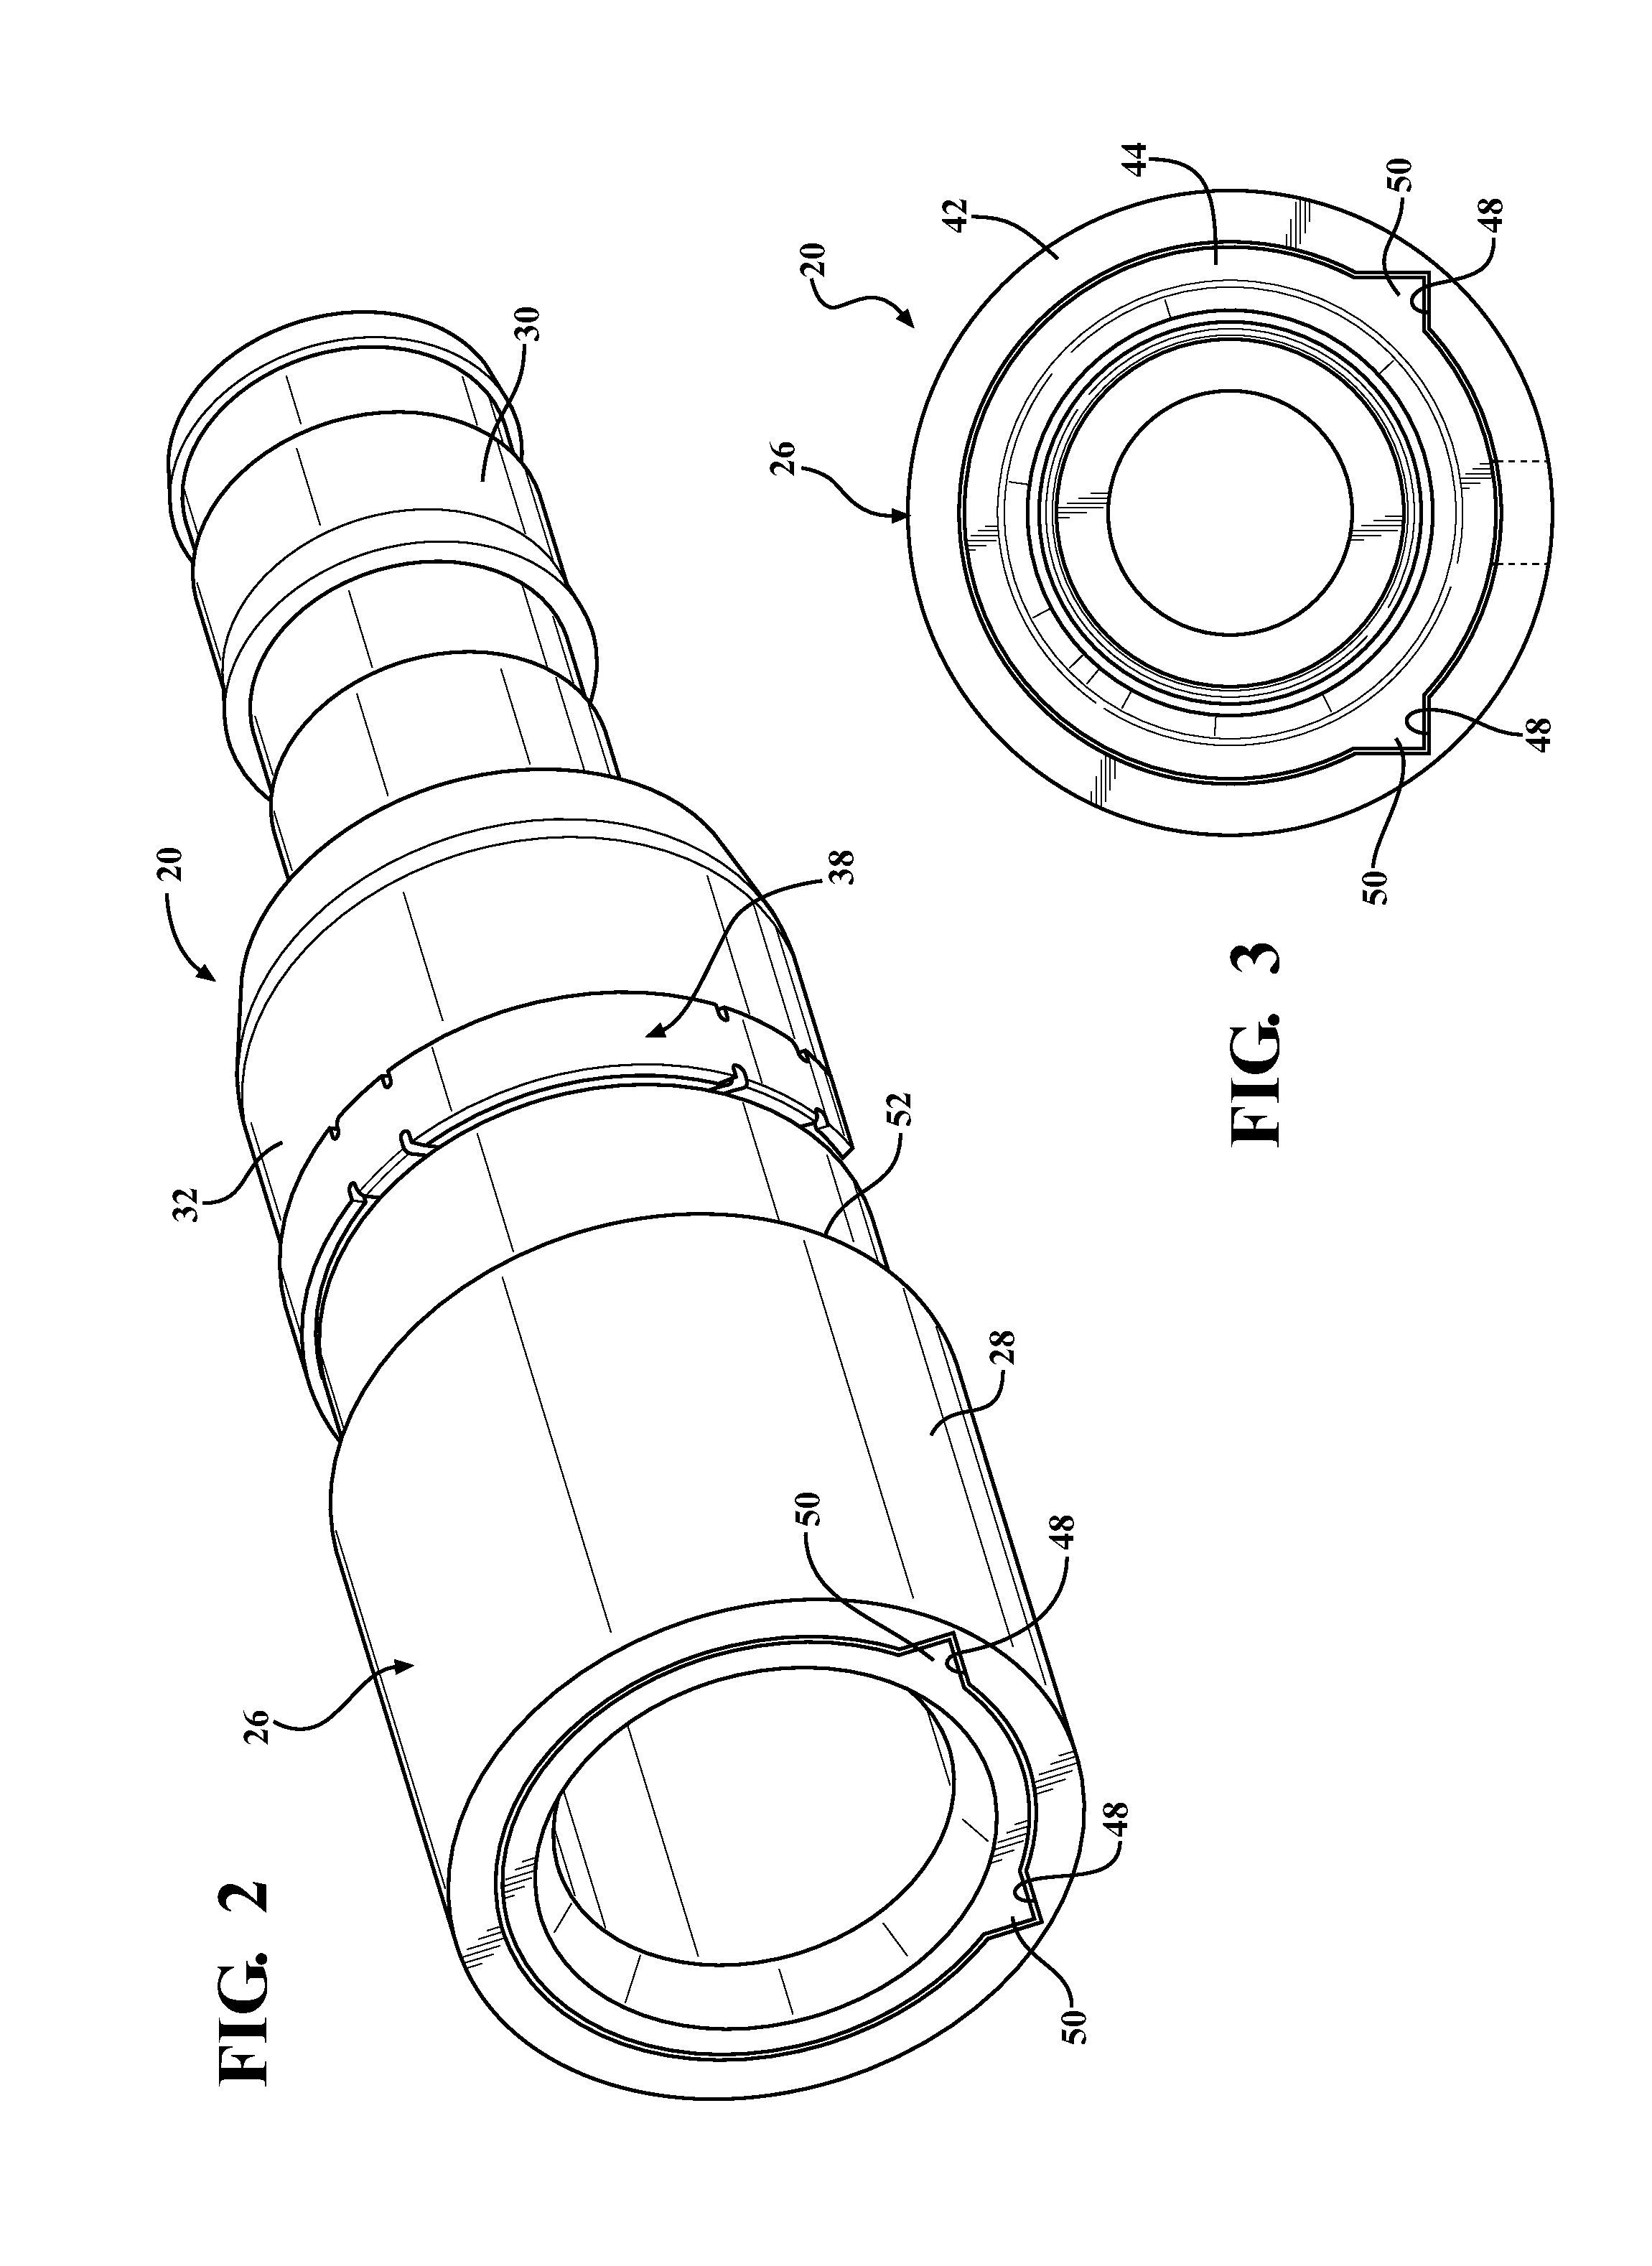 Pipe connector assembly